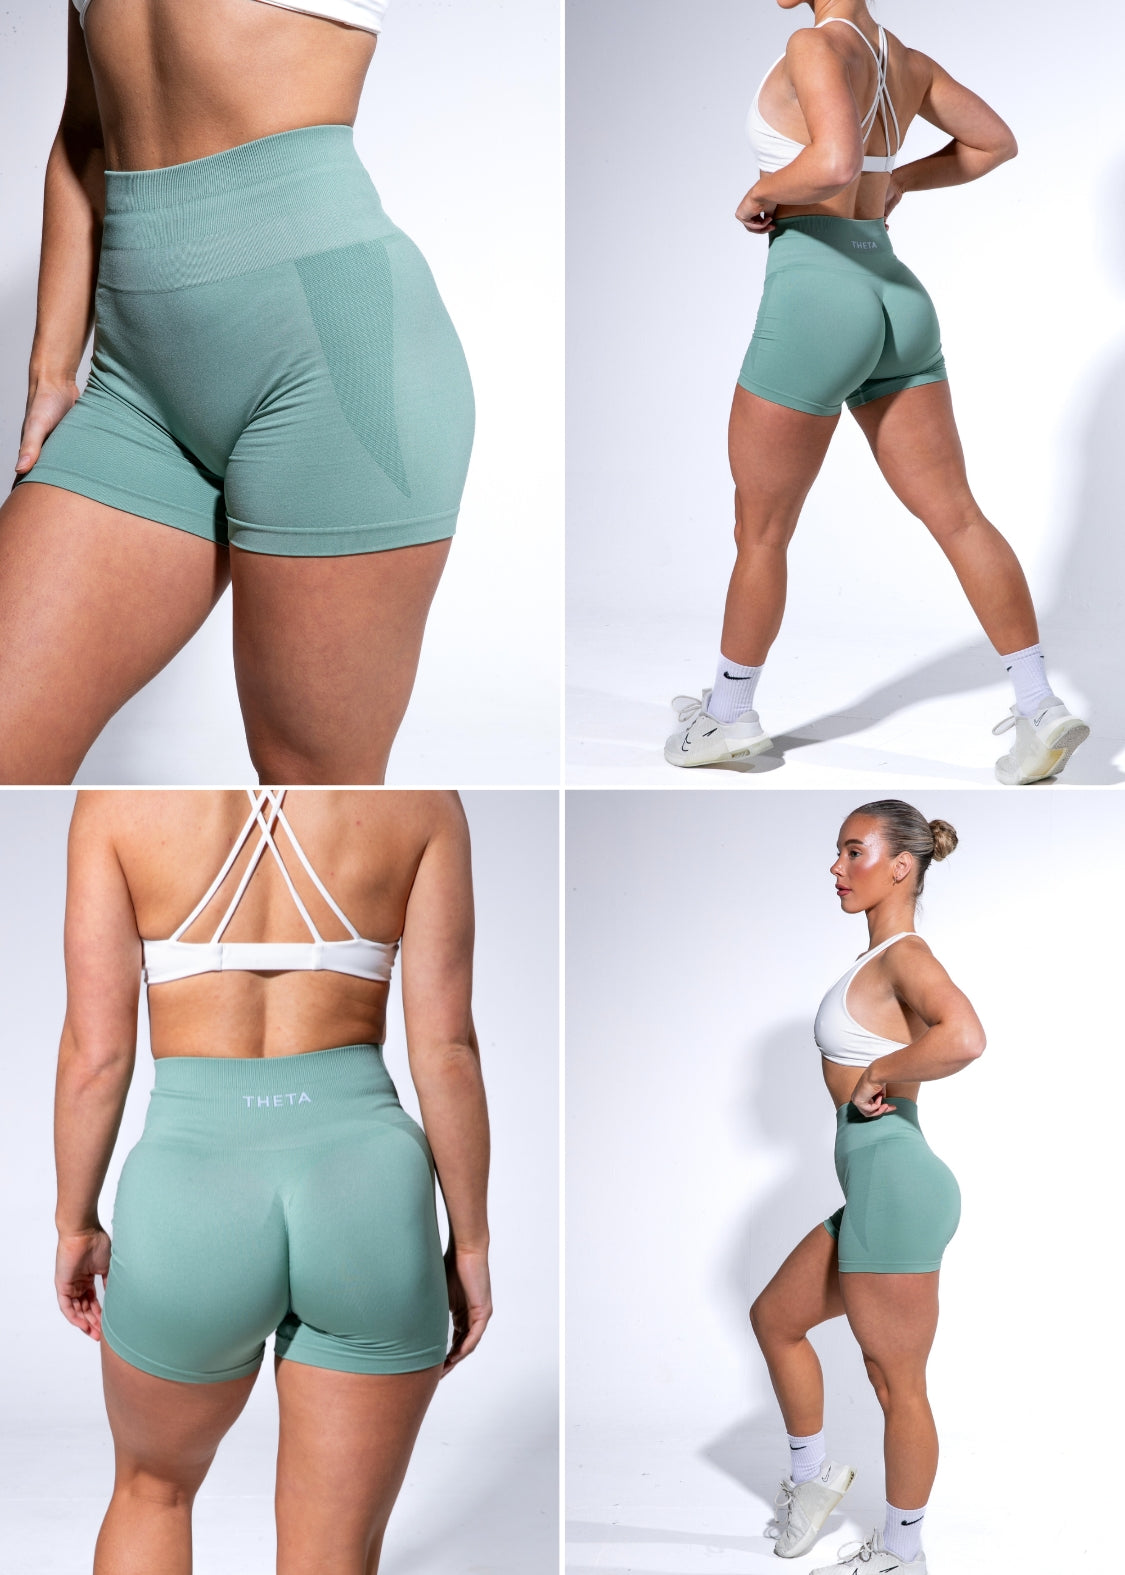 Womens Workout & Activewear Shorts